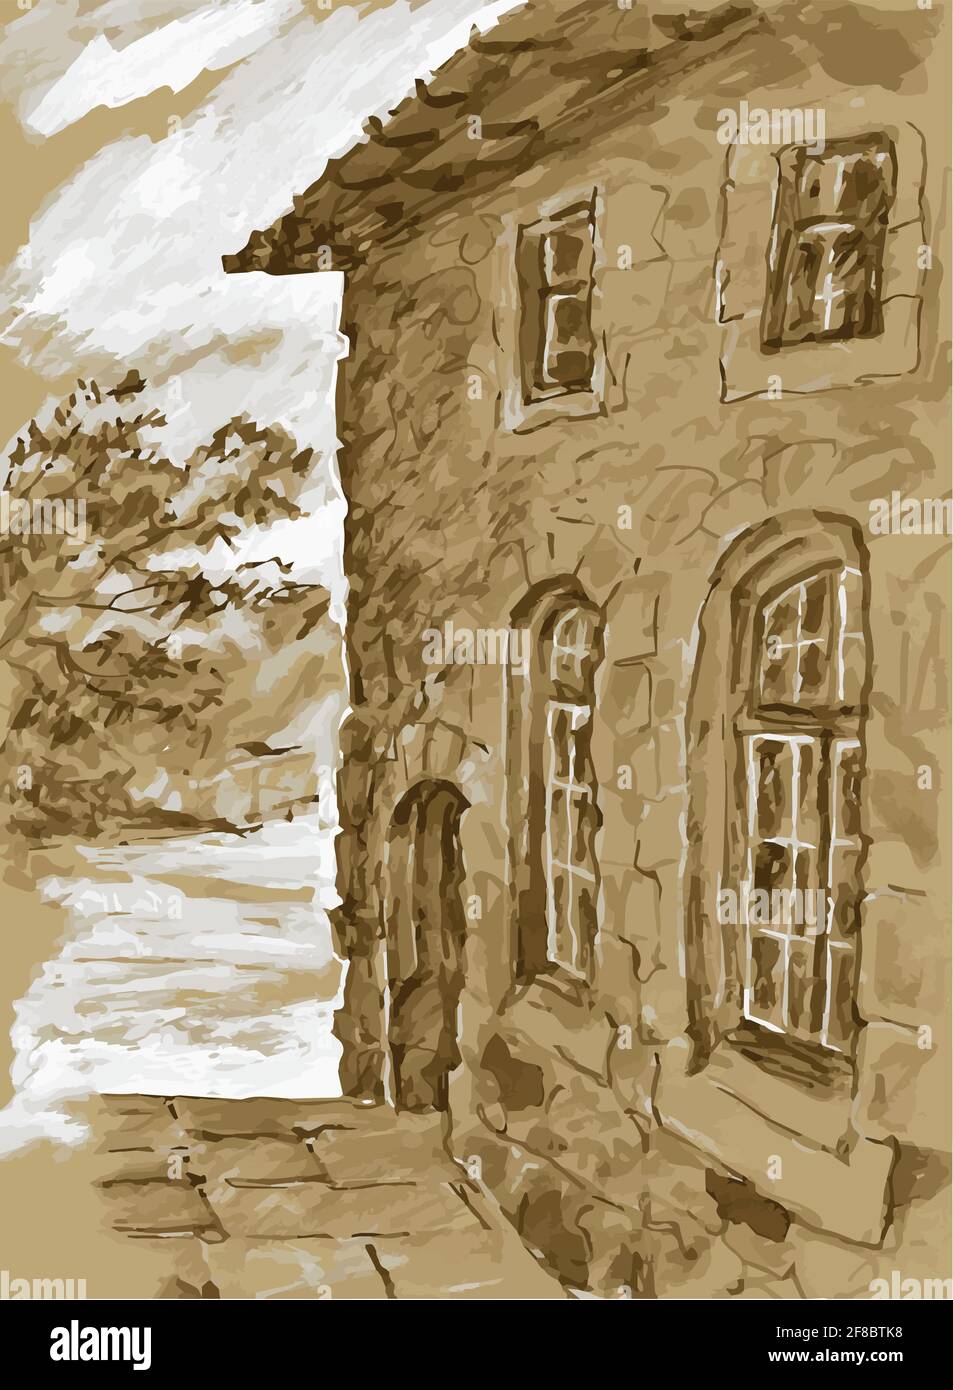 Fragment of the wall of an old stone mansion in perspective with windows and an entrance. Monochrome, sepia, sketch. Stock Vector